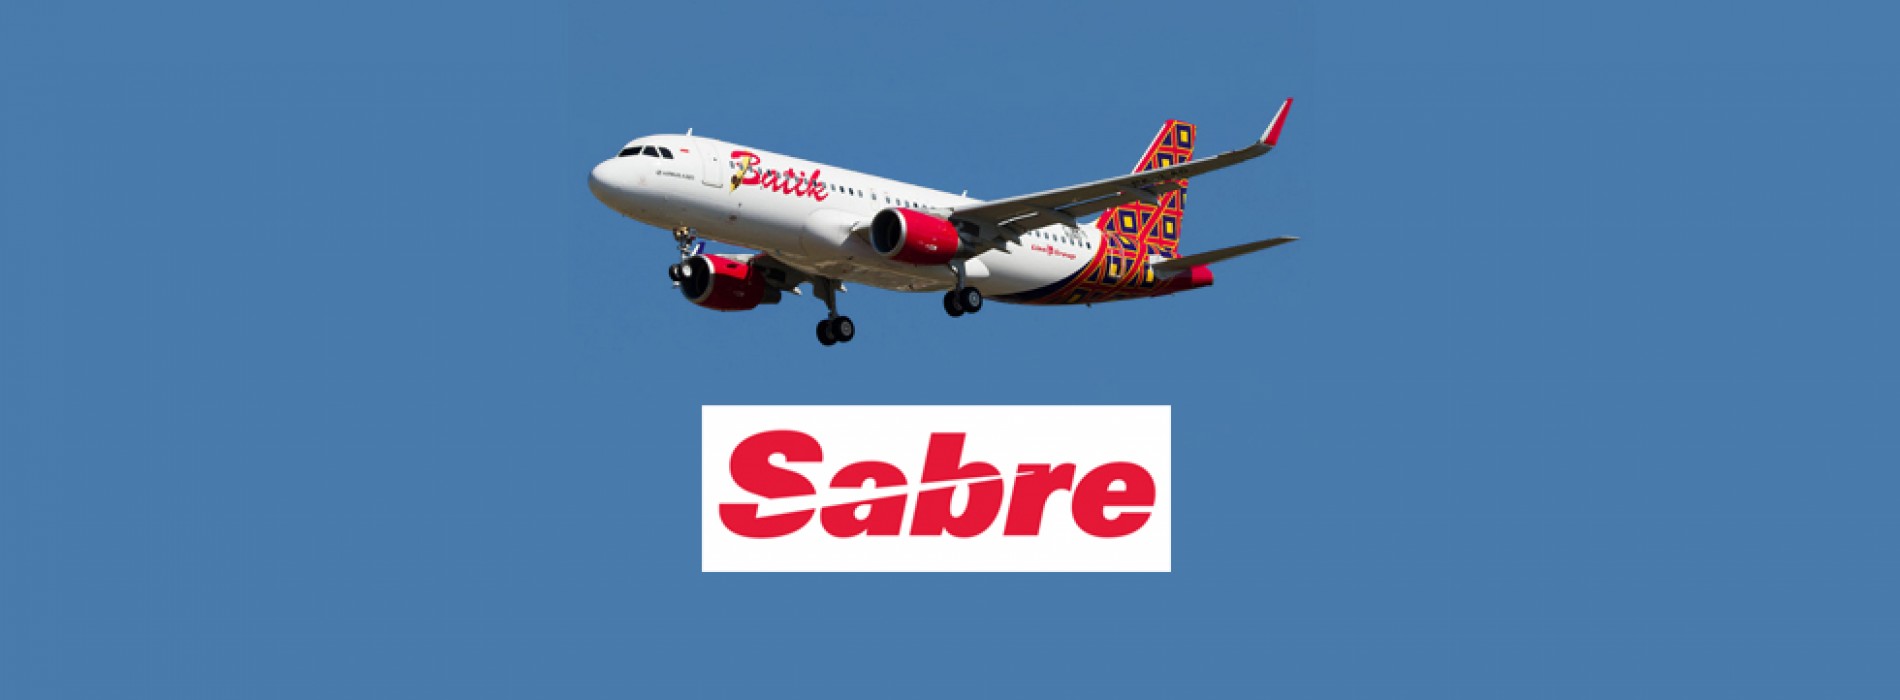 Batik Air to drive new growth with Sabre as its first-ever GDS partner